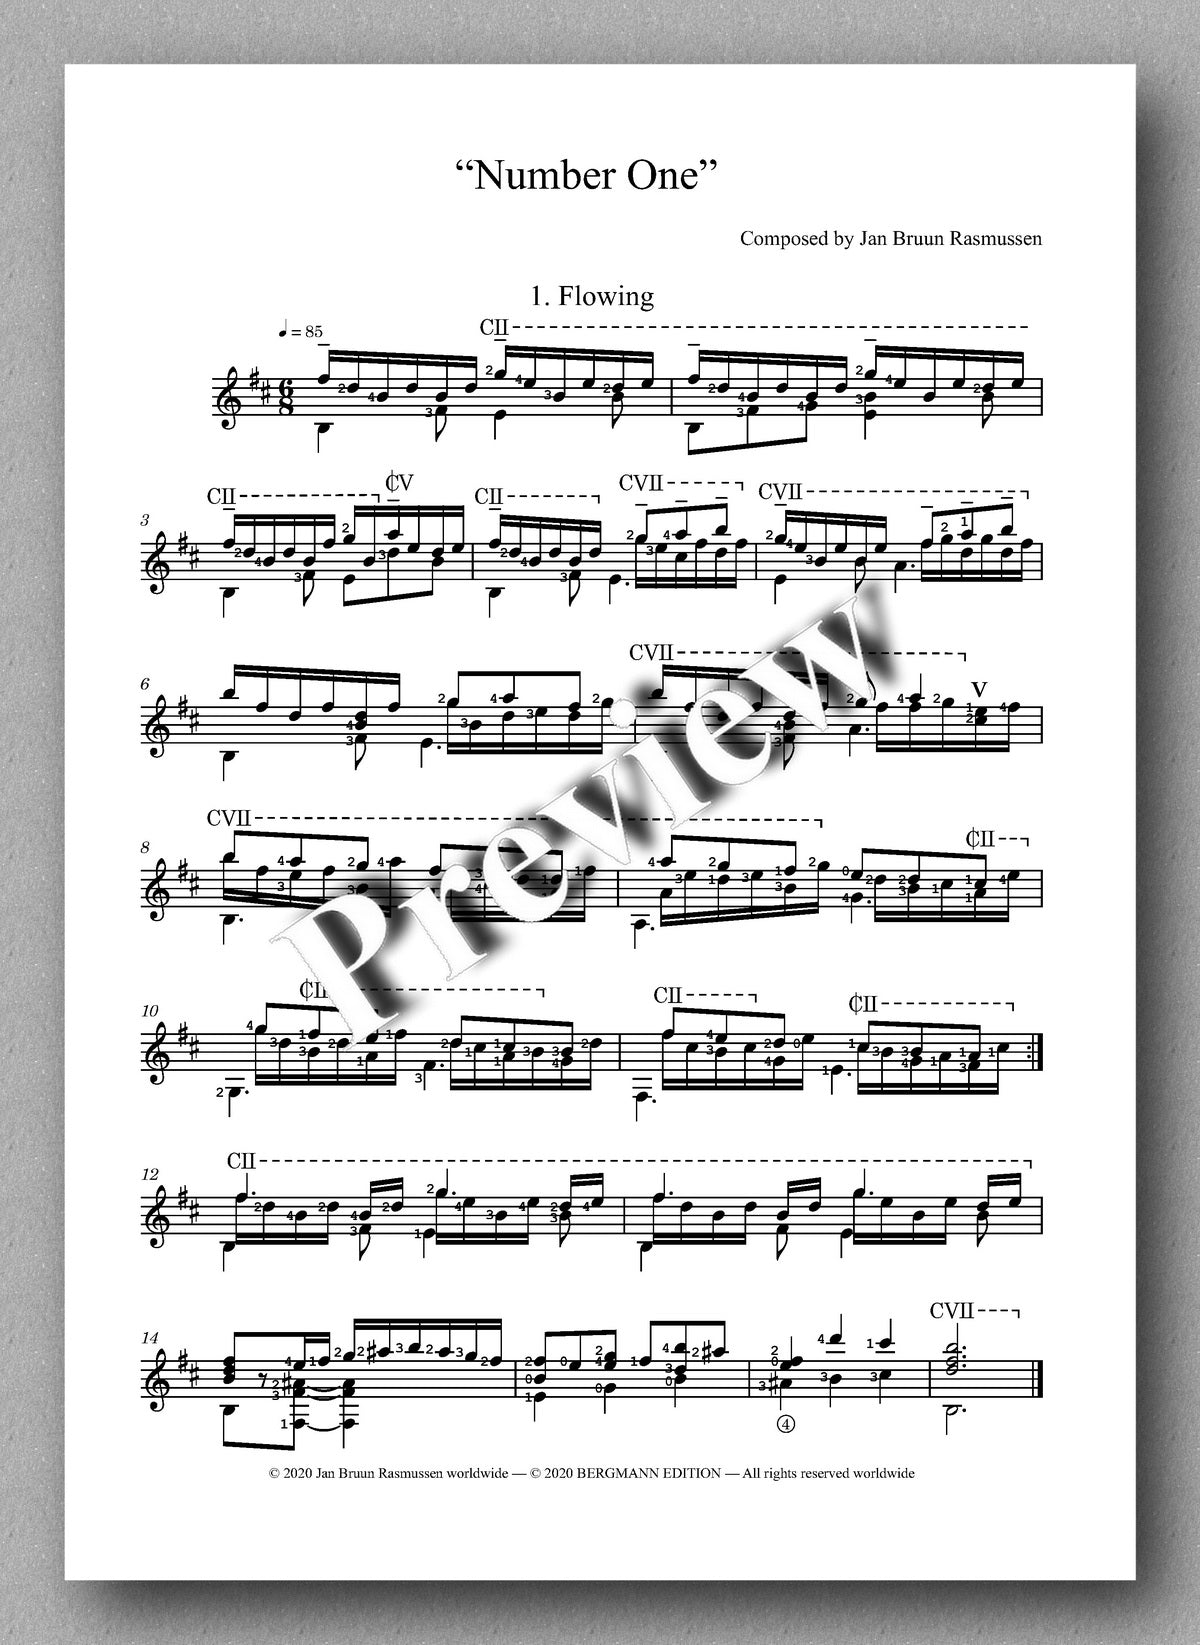 Rasmussen, Number One - preview of the music score 1